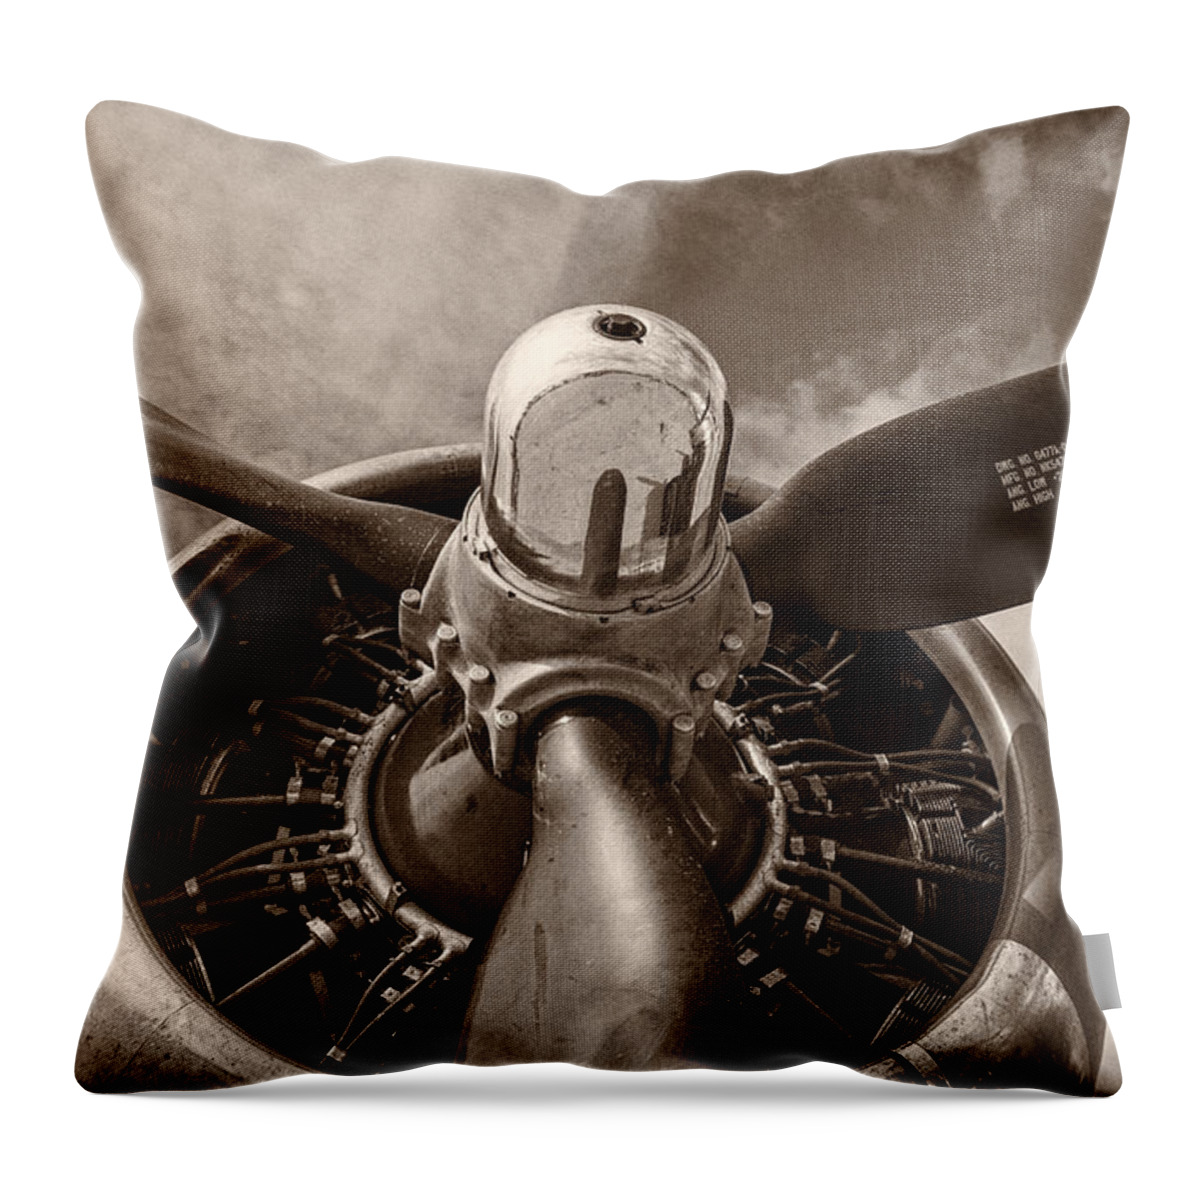 3scape Throw Pillow featuring the photograph Vintage B-17 by Adam Romanowicz